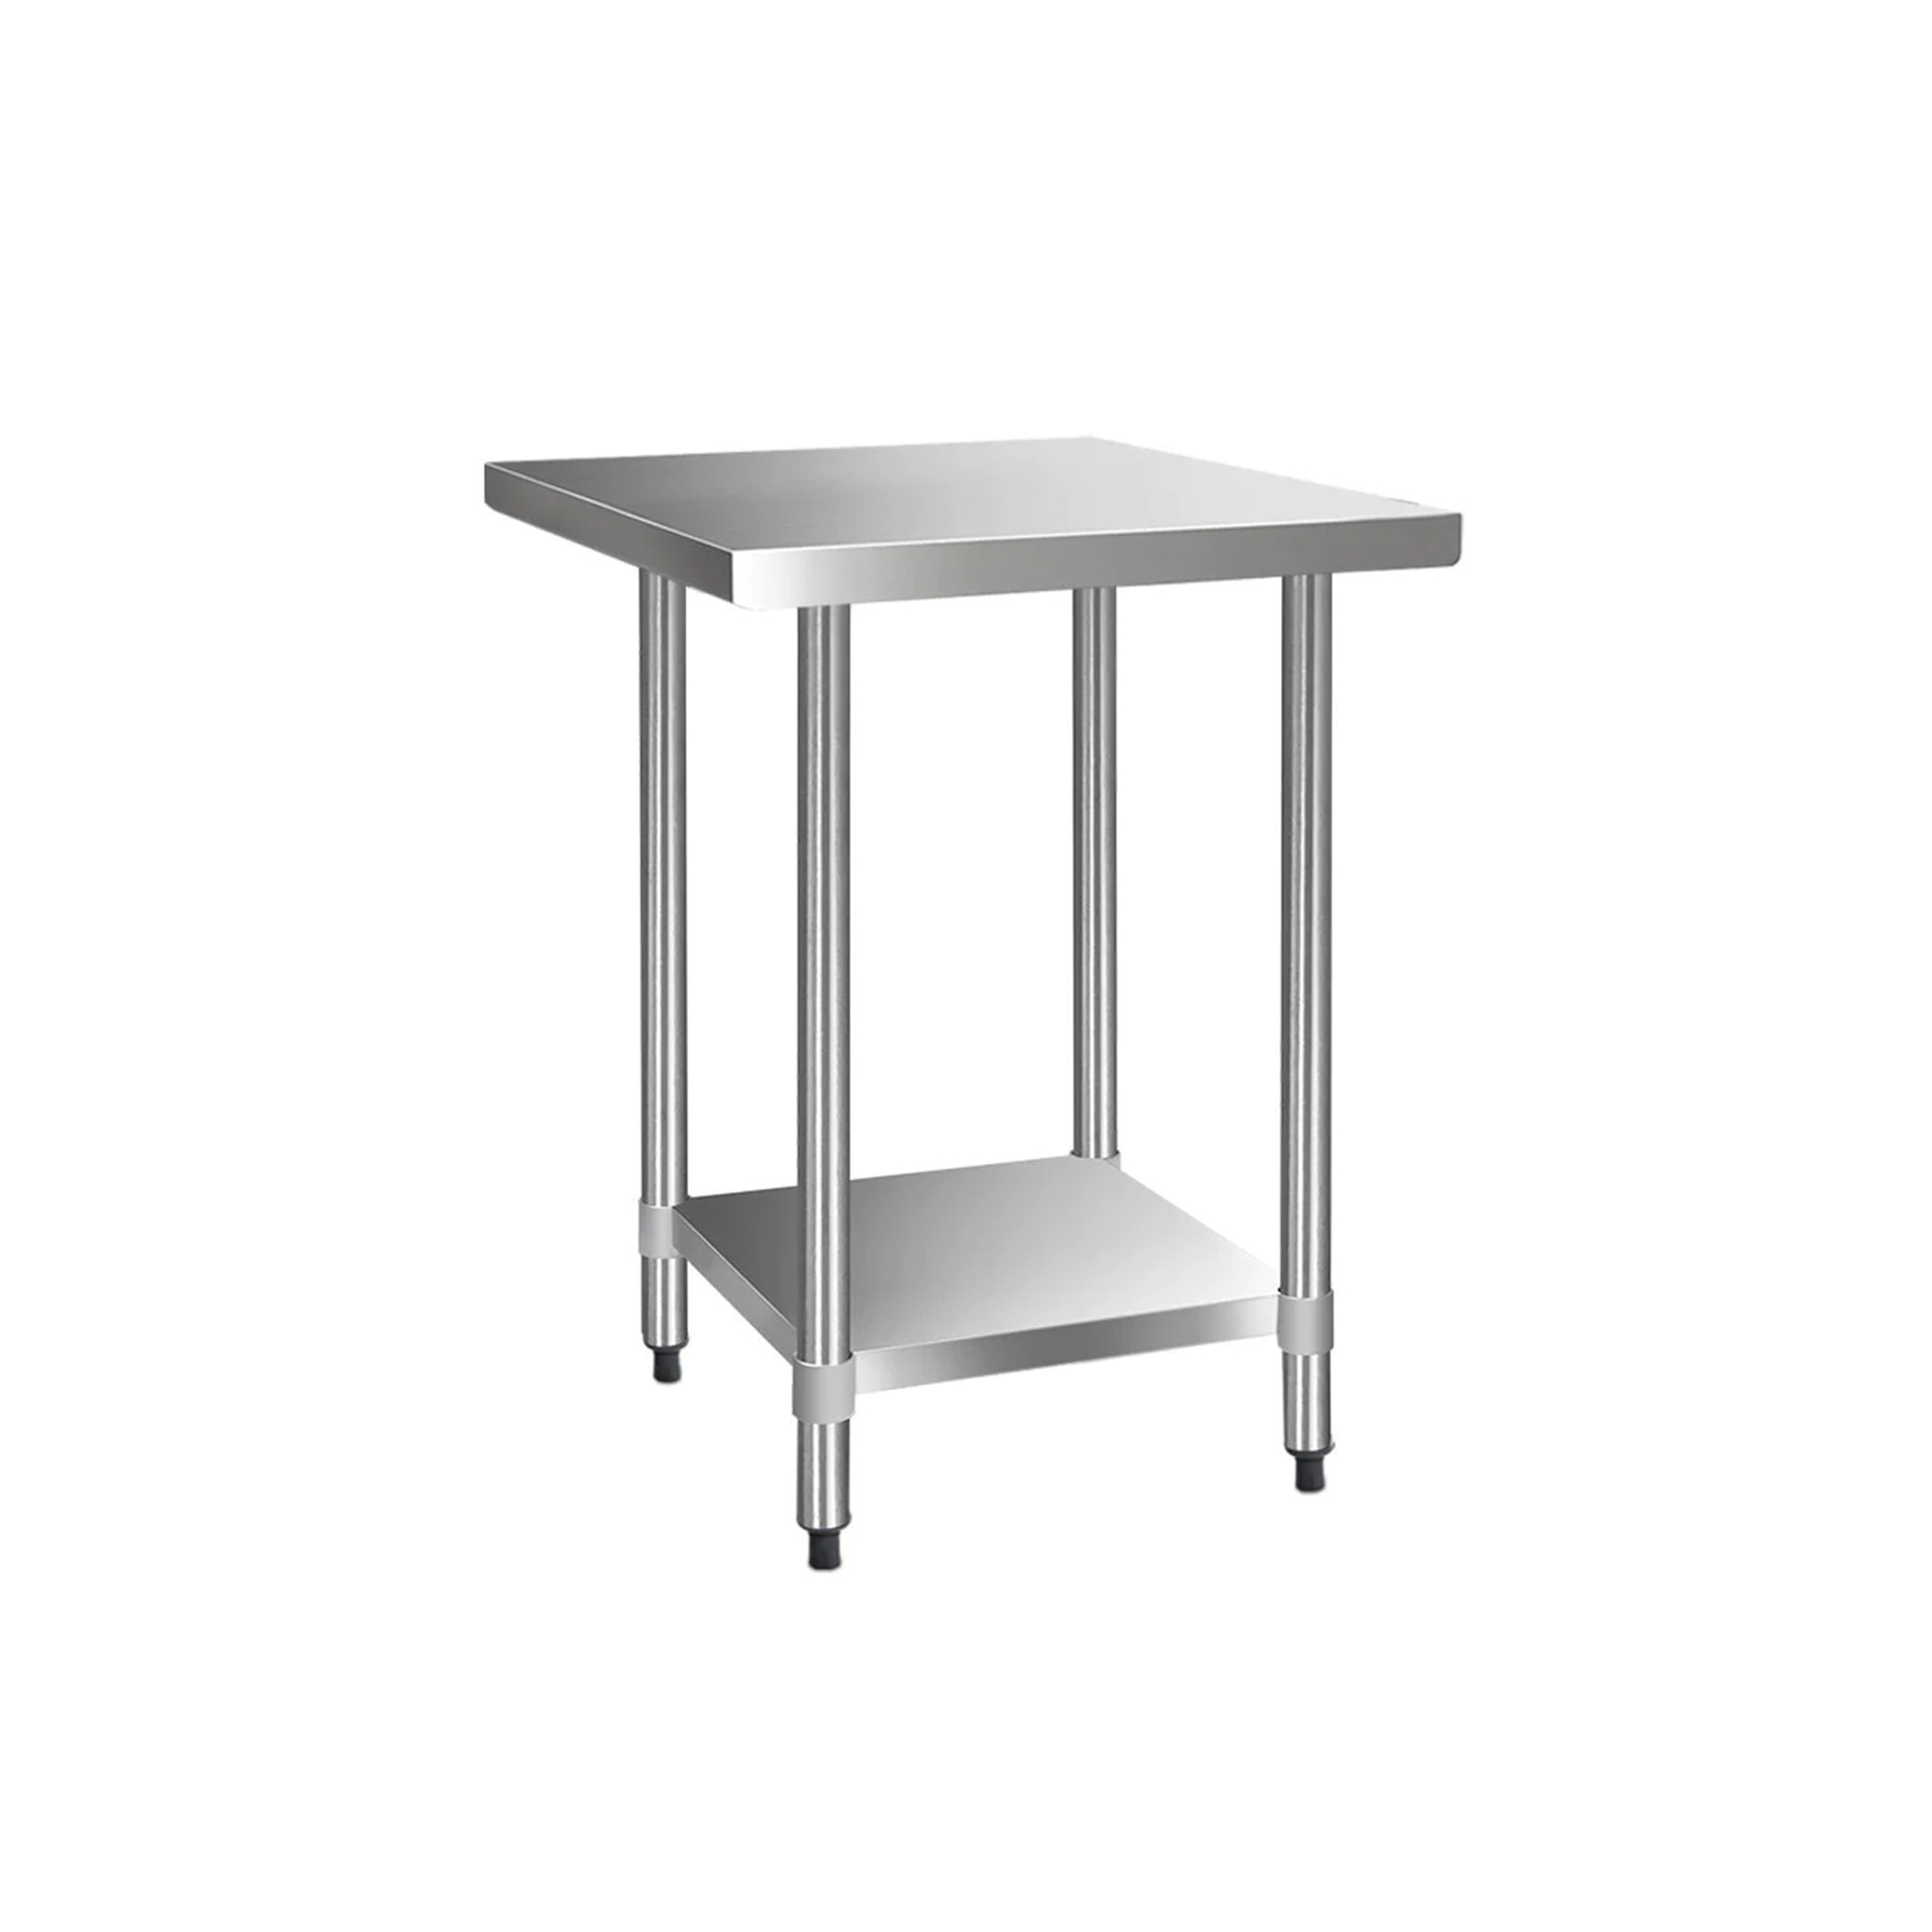 Cefito 430 Stainless Steel Kitchen Bench 76x76cm Image 1